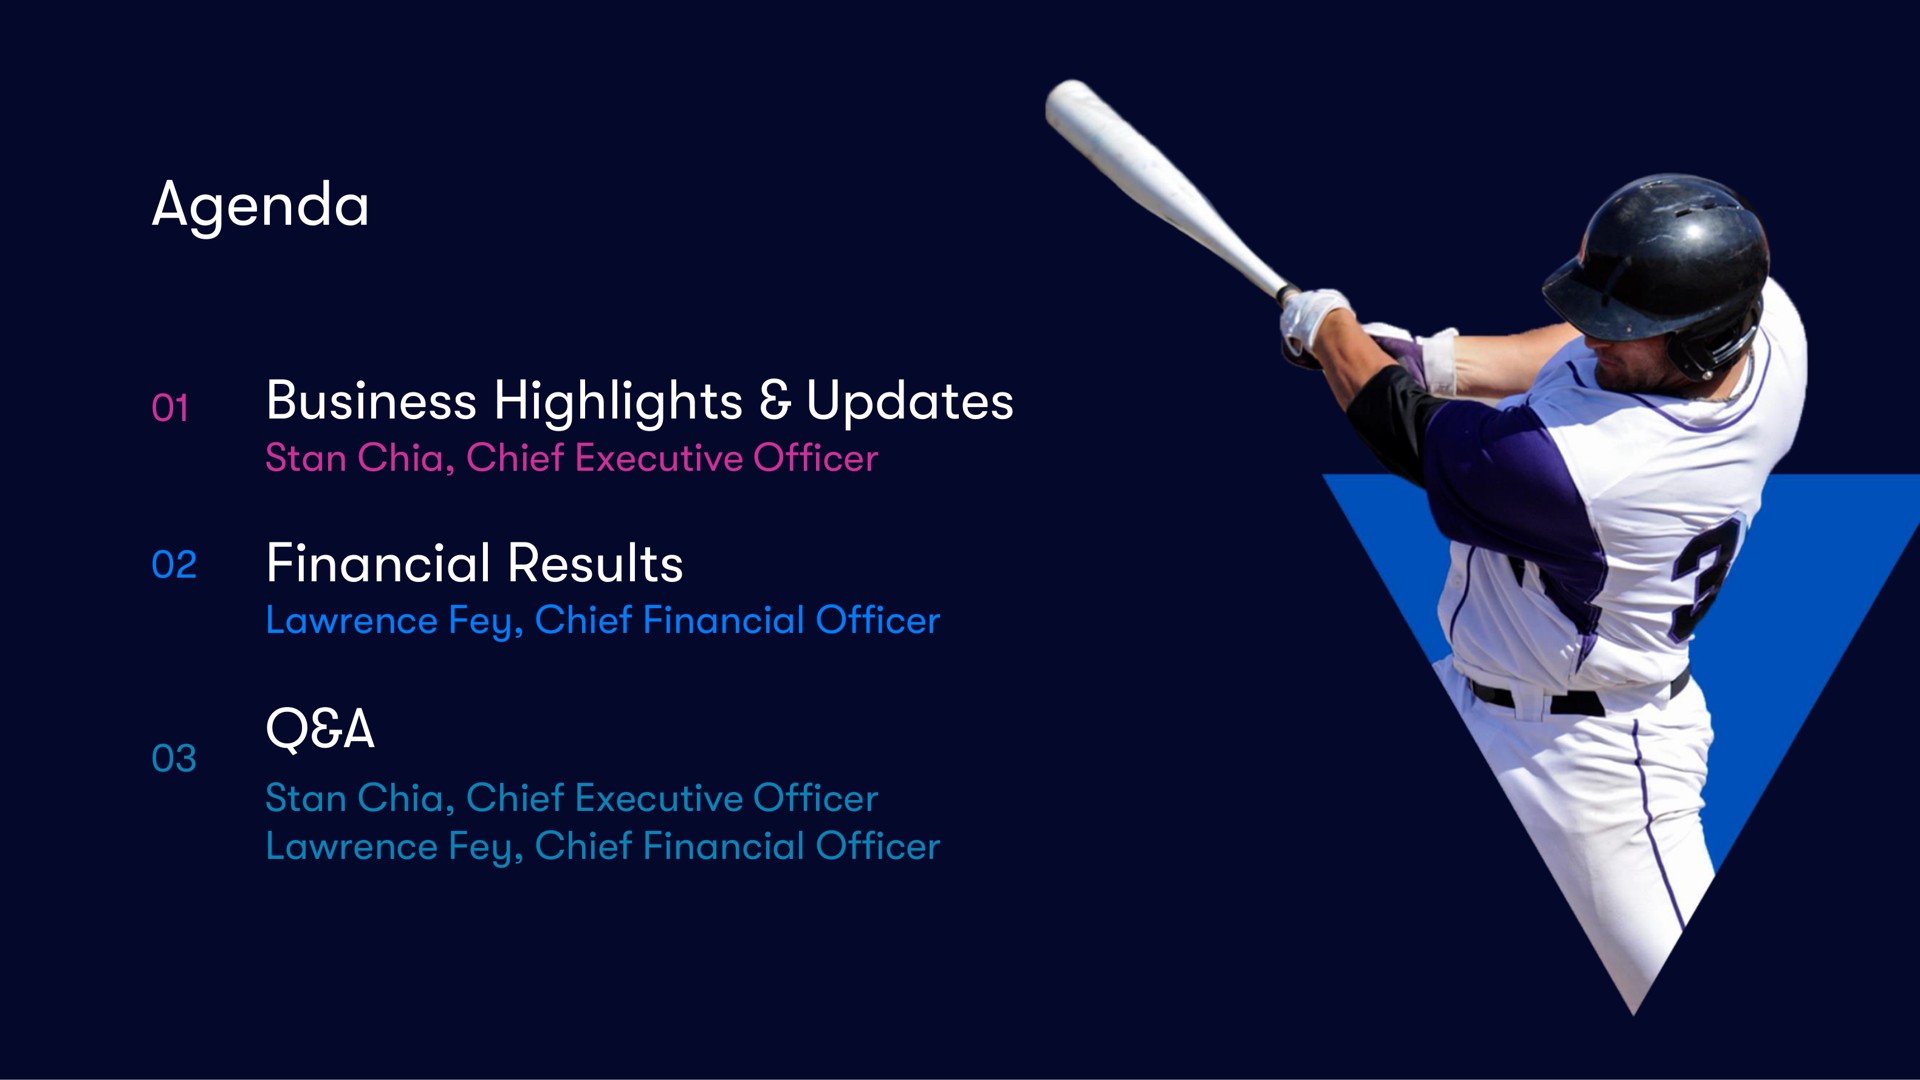 agenda business highlights updates financial results a | Vivid Seats